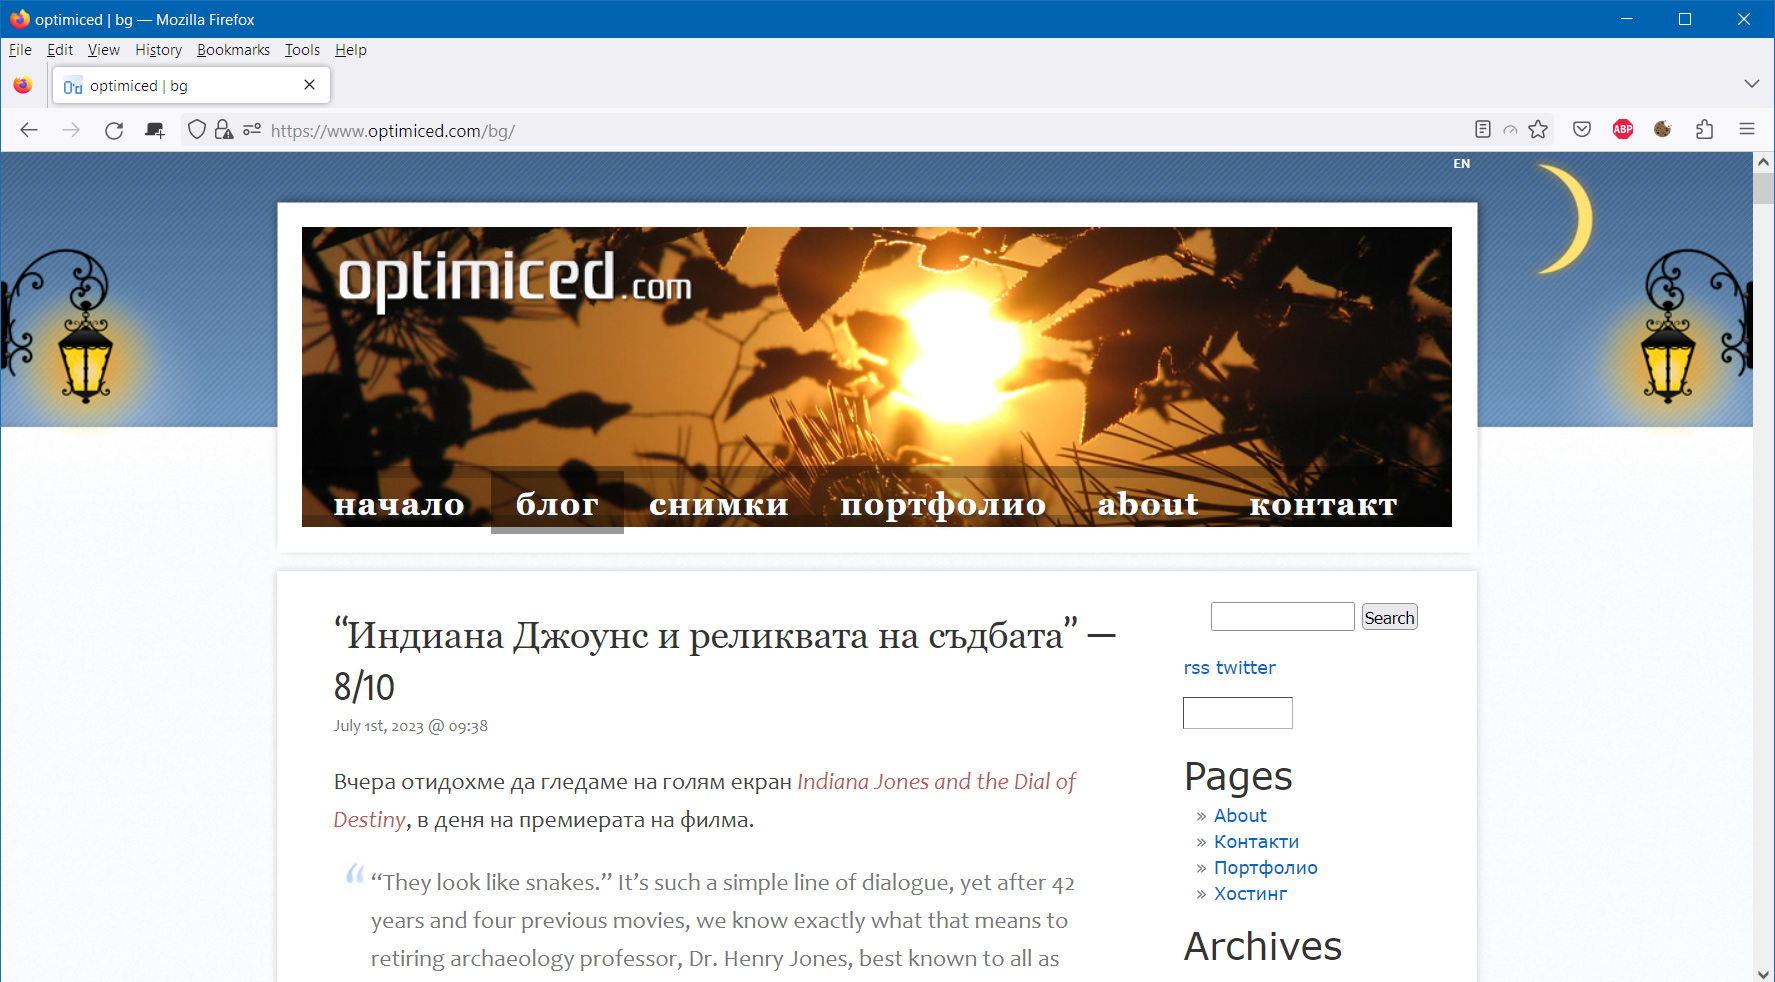 The header of optimiced.com (bg) in the evening/night..